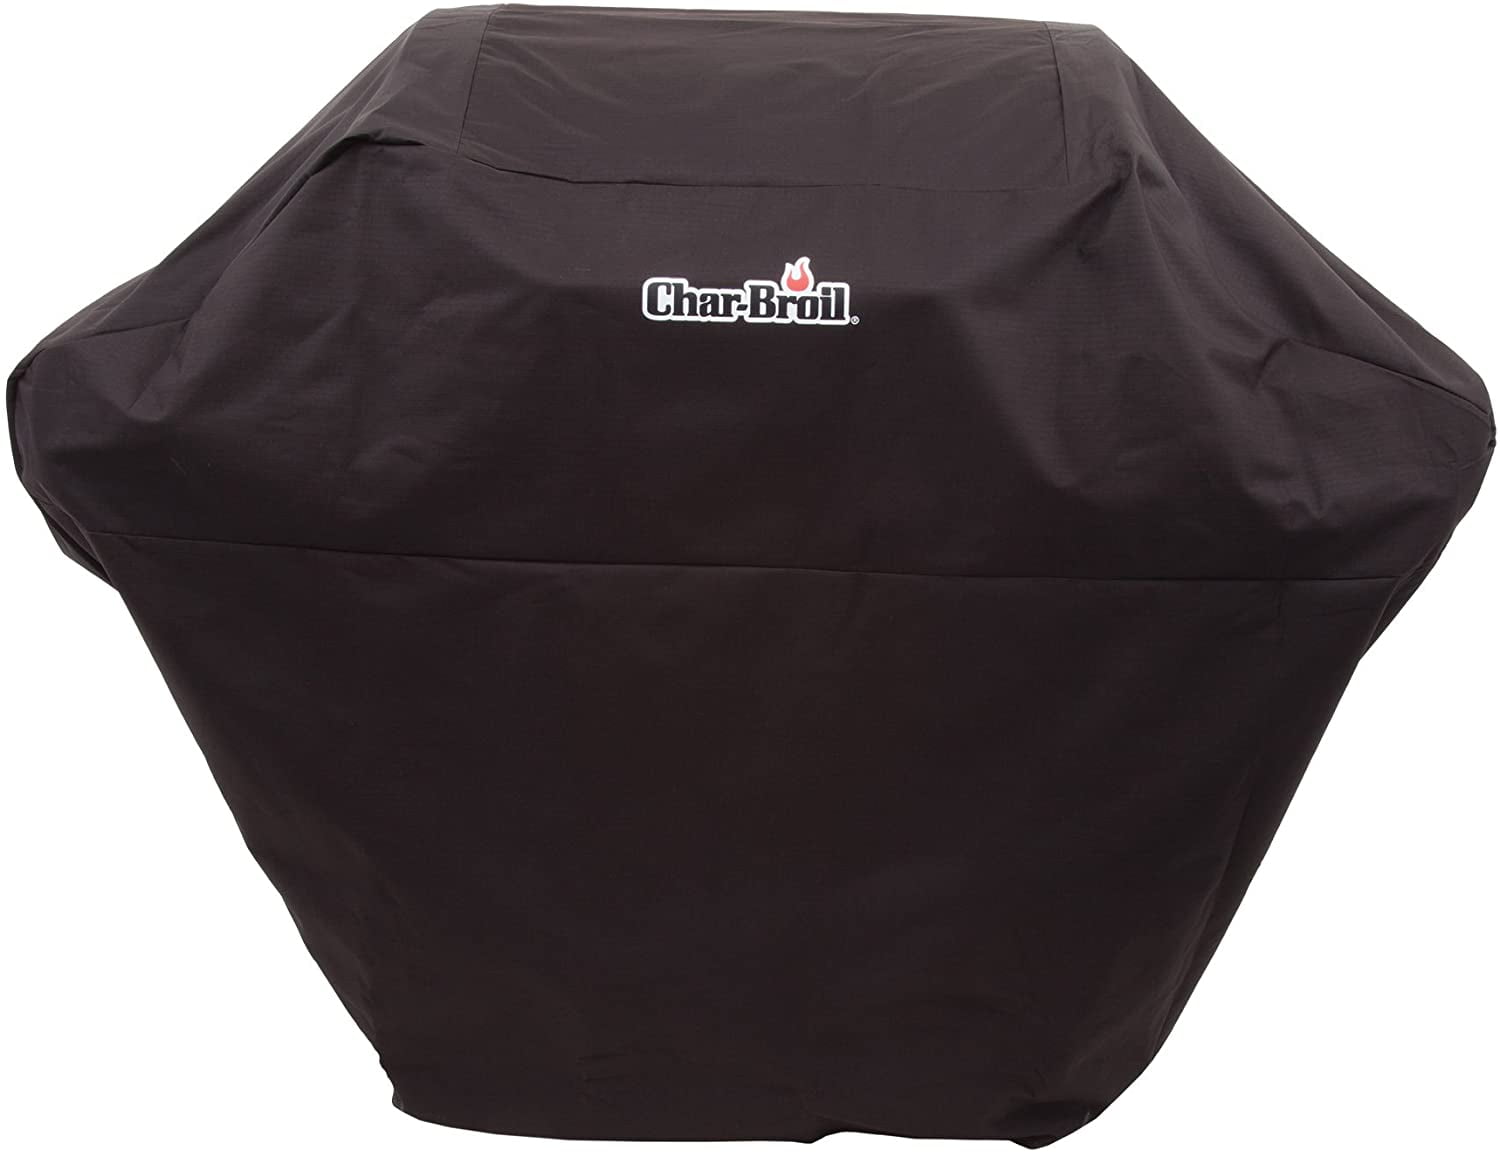 Char-Broil 3-5 Burner Rip-Stop Gas Grill Cover Heavy Duty Waterproof Resistant 